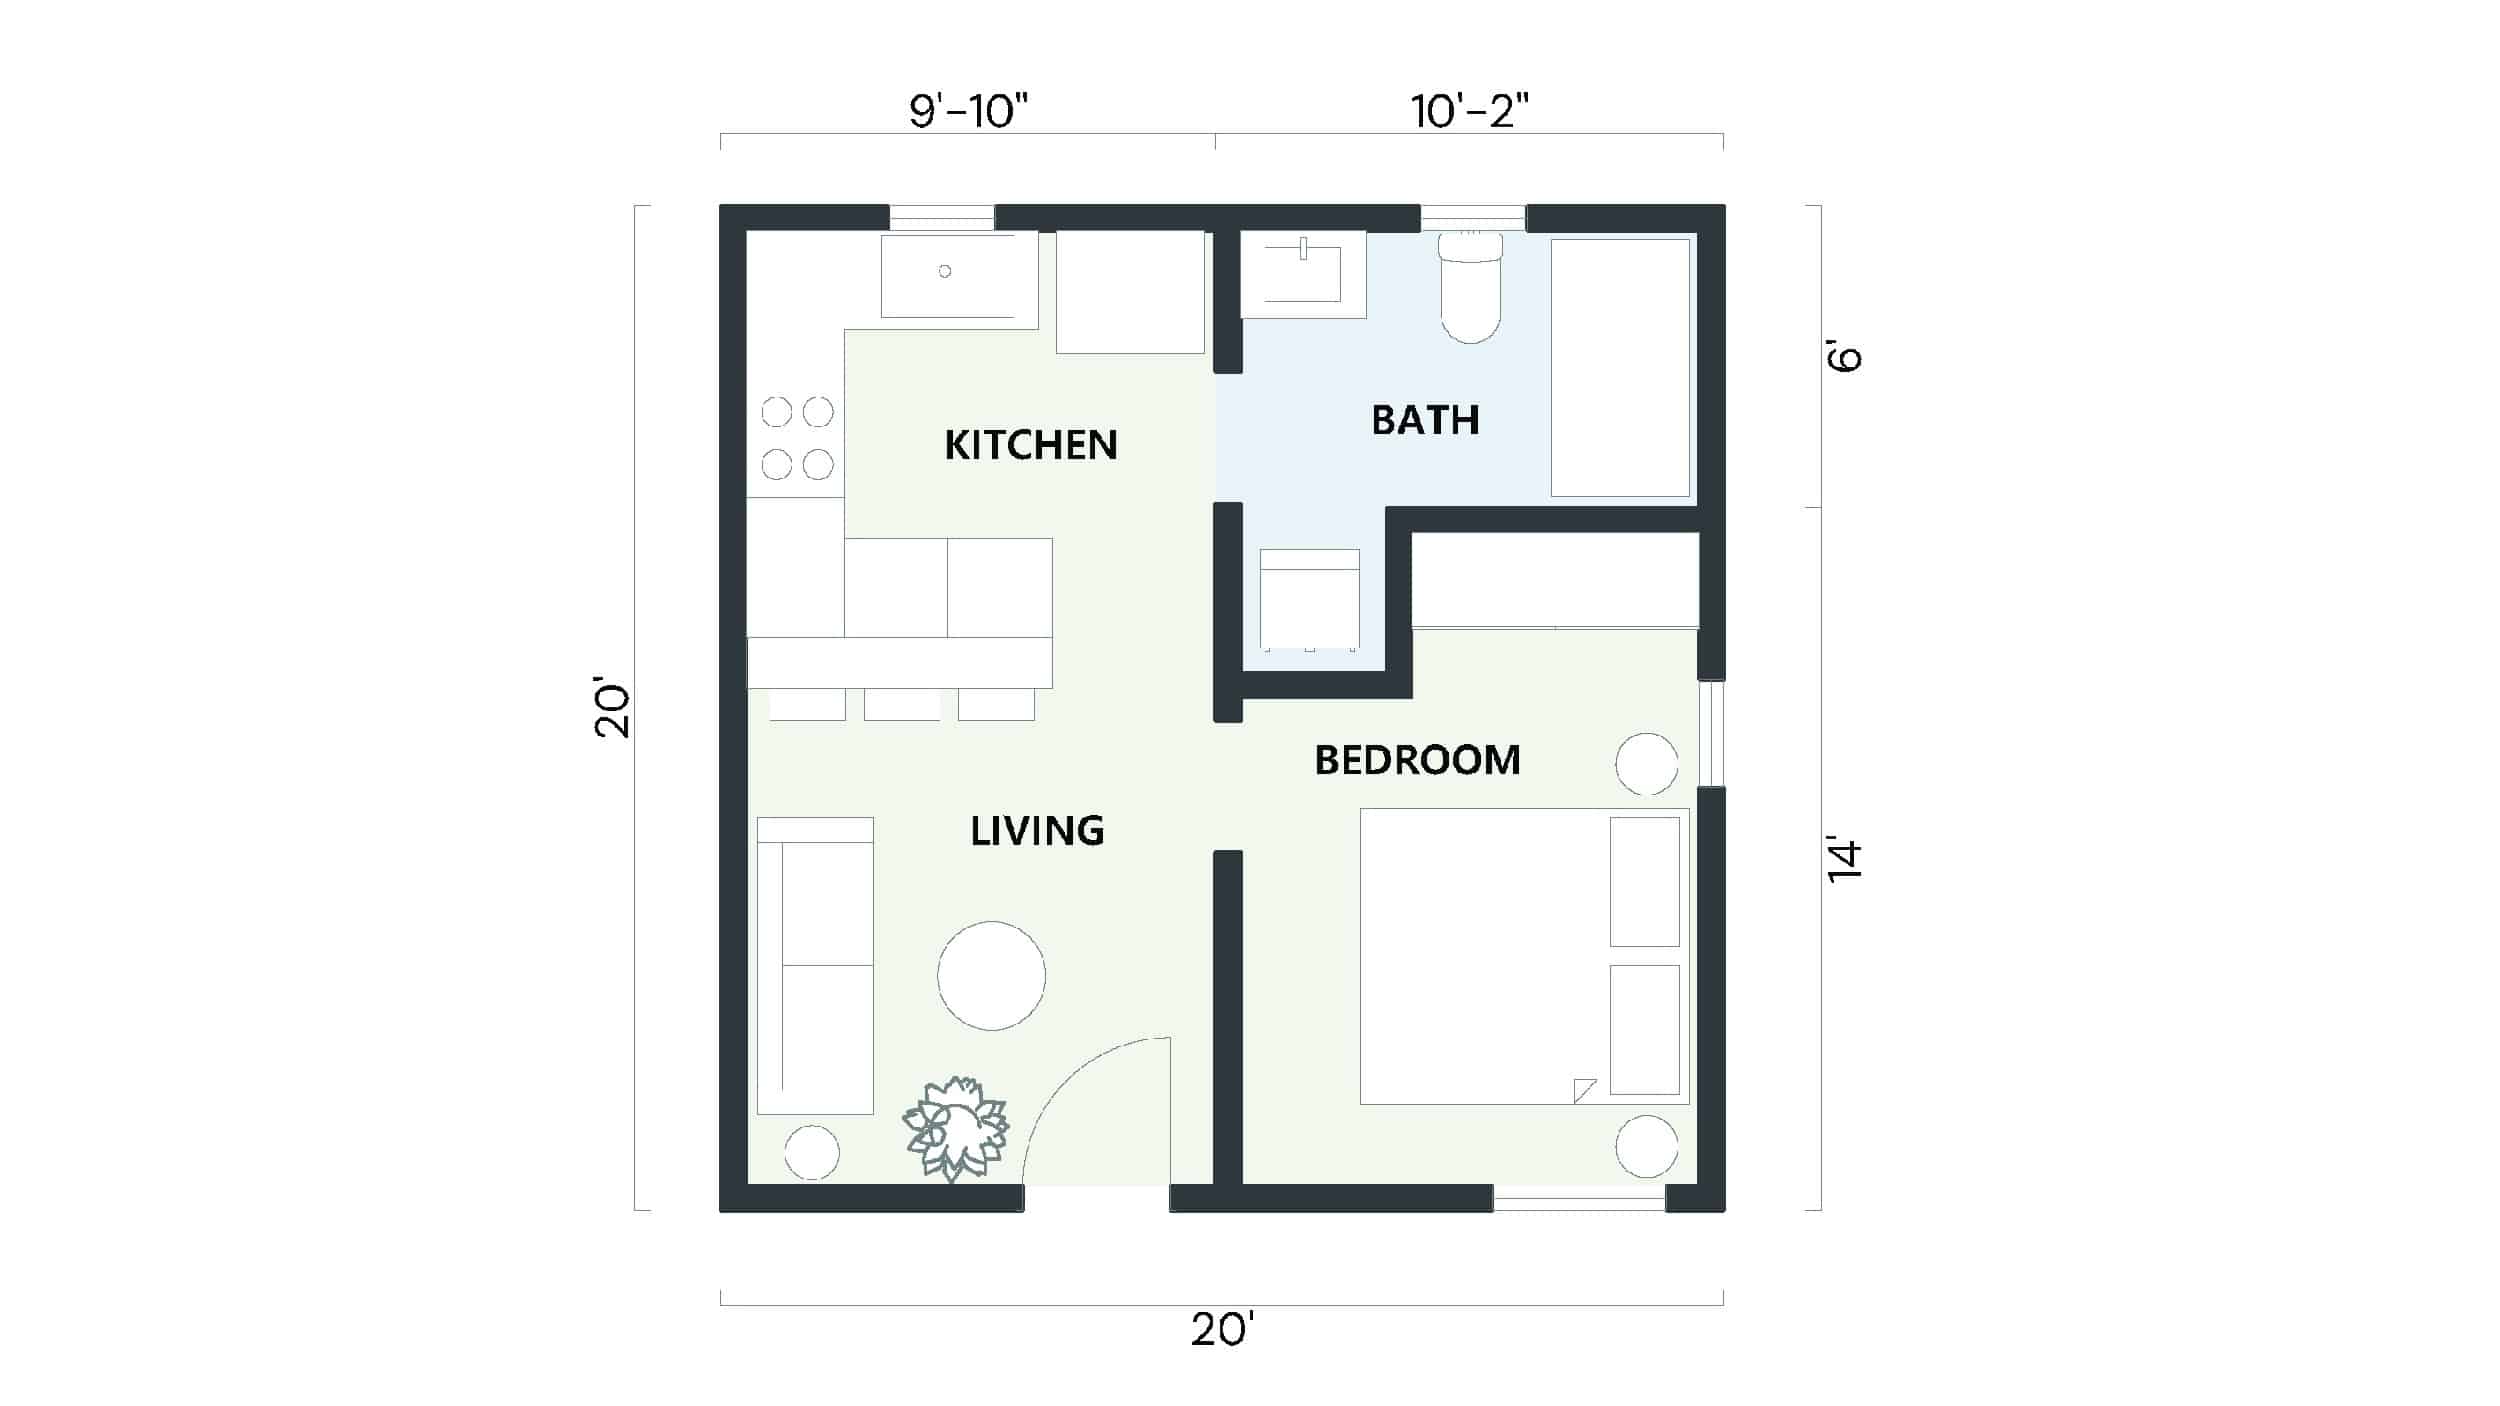 Floor plan of a small apartment